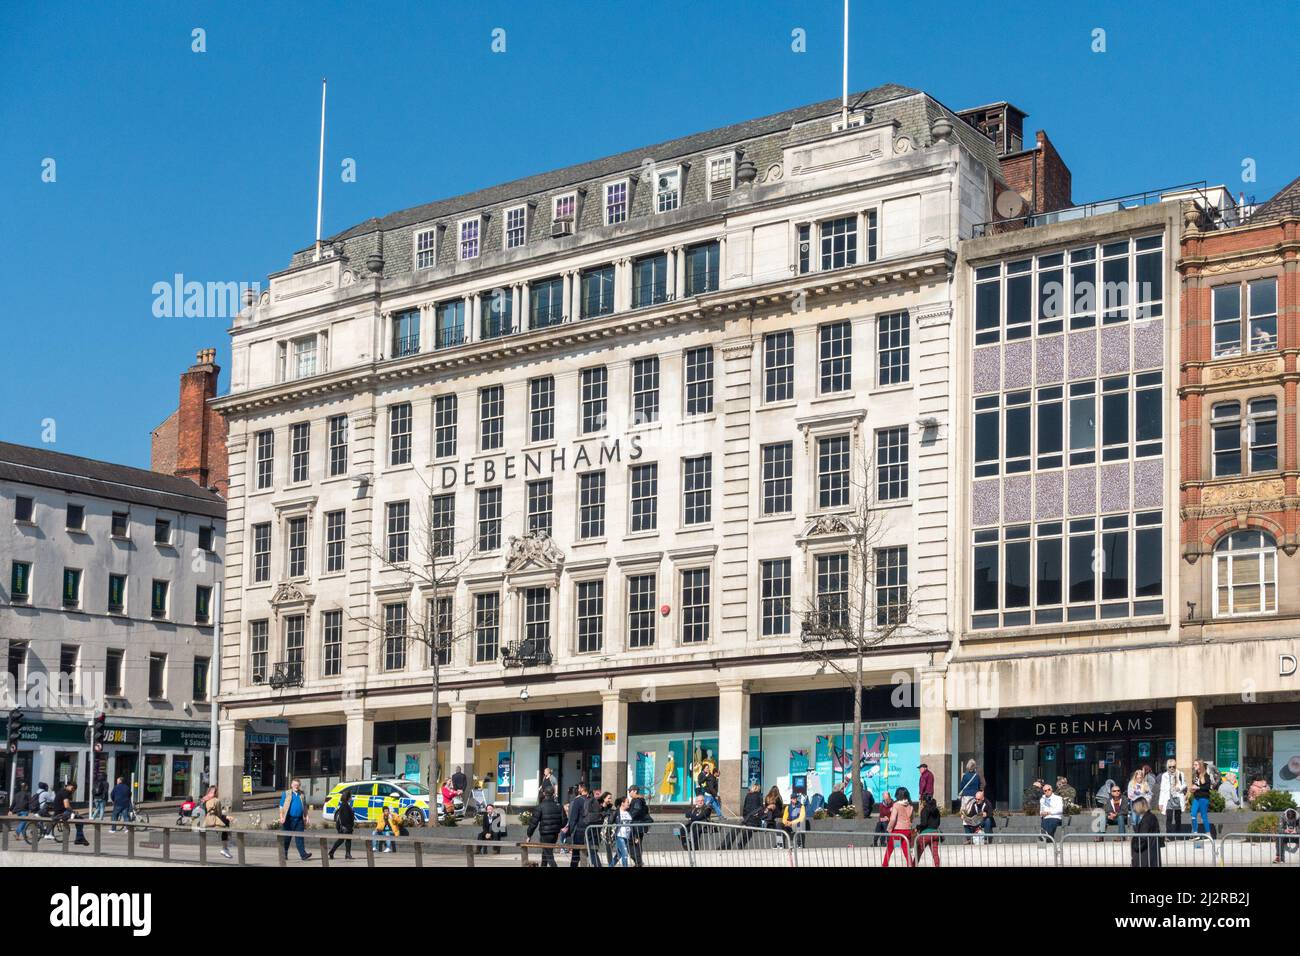 Old Debenhams Department store building (closed in May 2021) in Old Market Square, Nottingham, England, UK Stock Photo